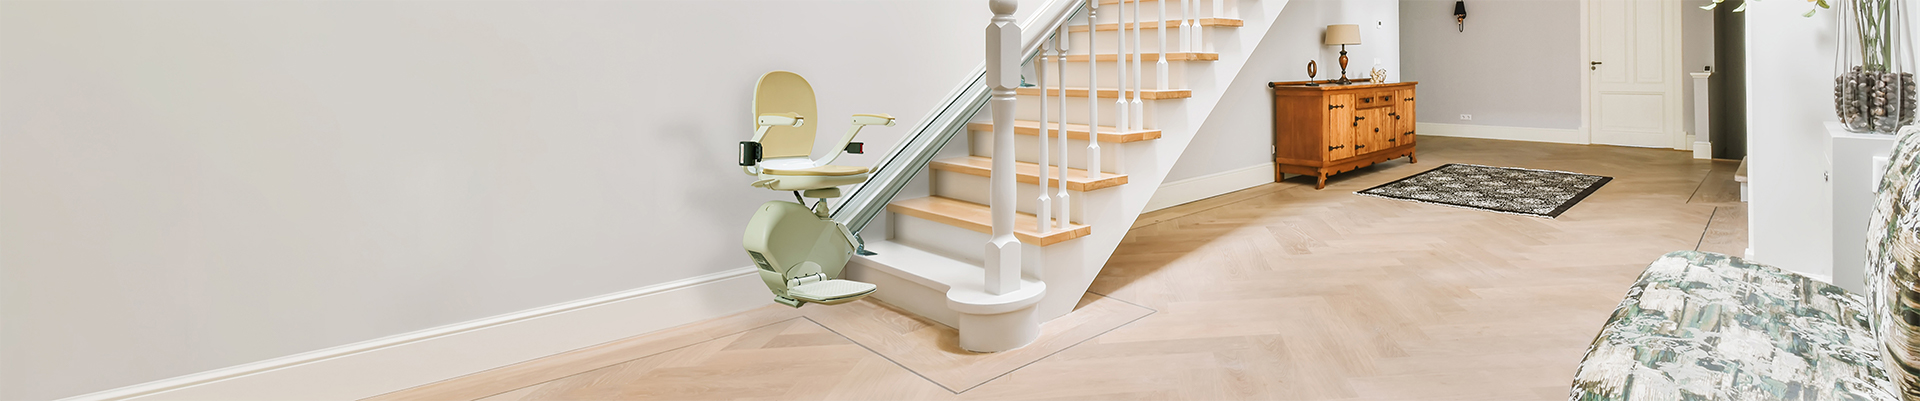 Stairlifts in a London home